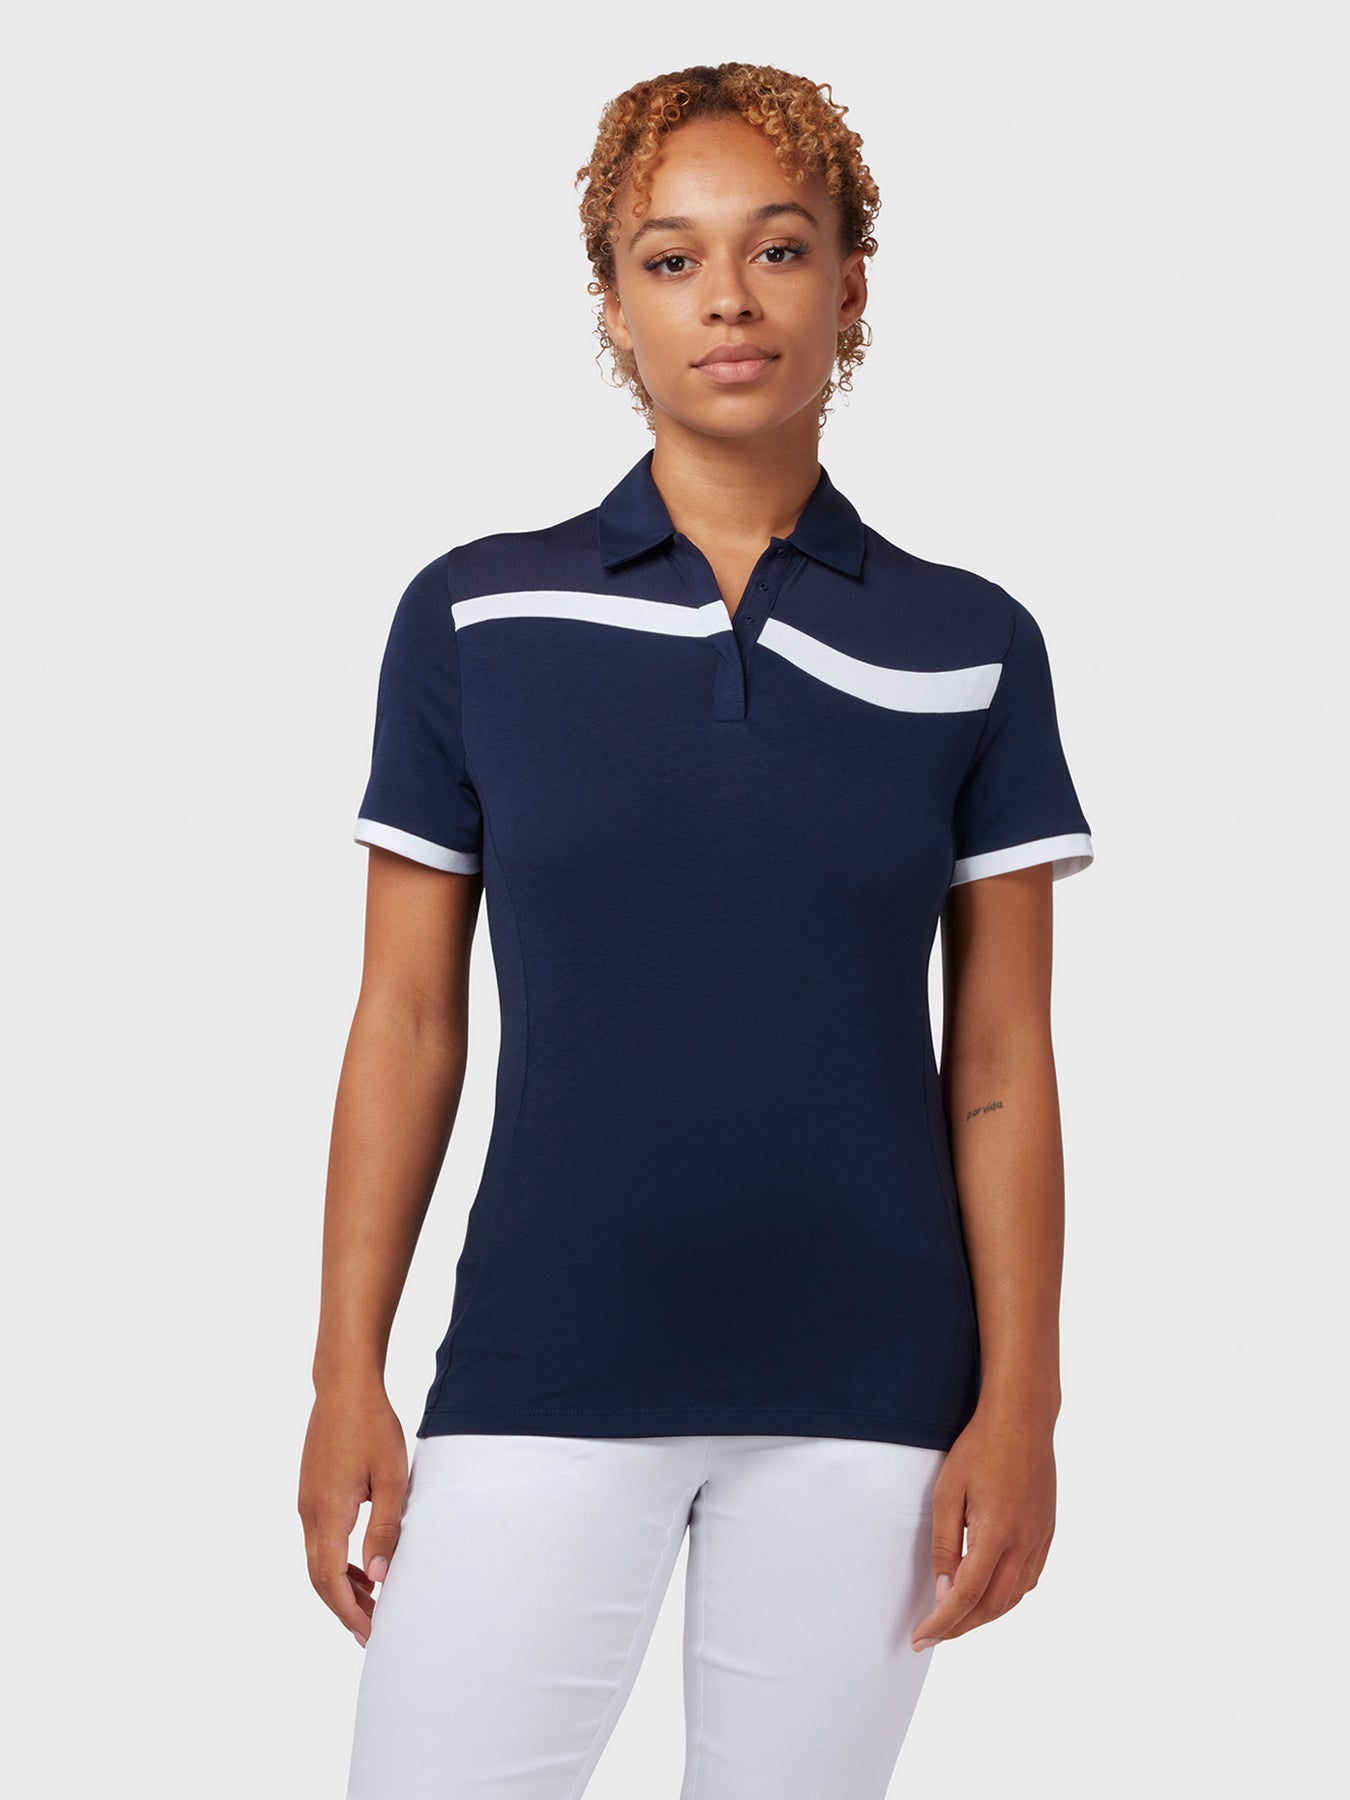 View Colour Block Womens Polo In Peacoat Peacoat S information